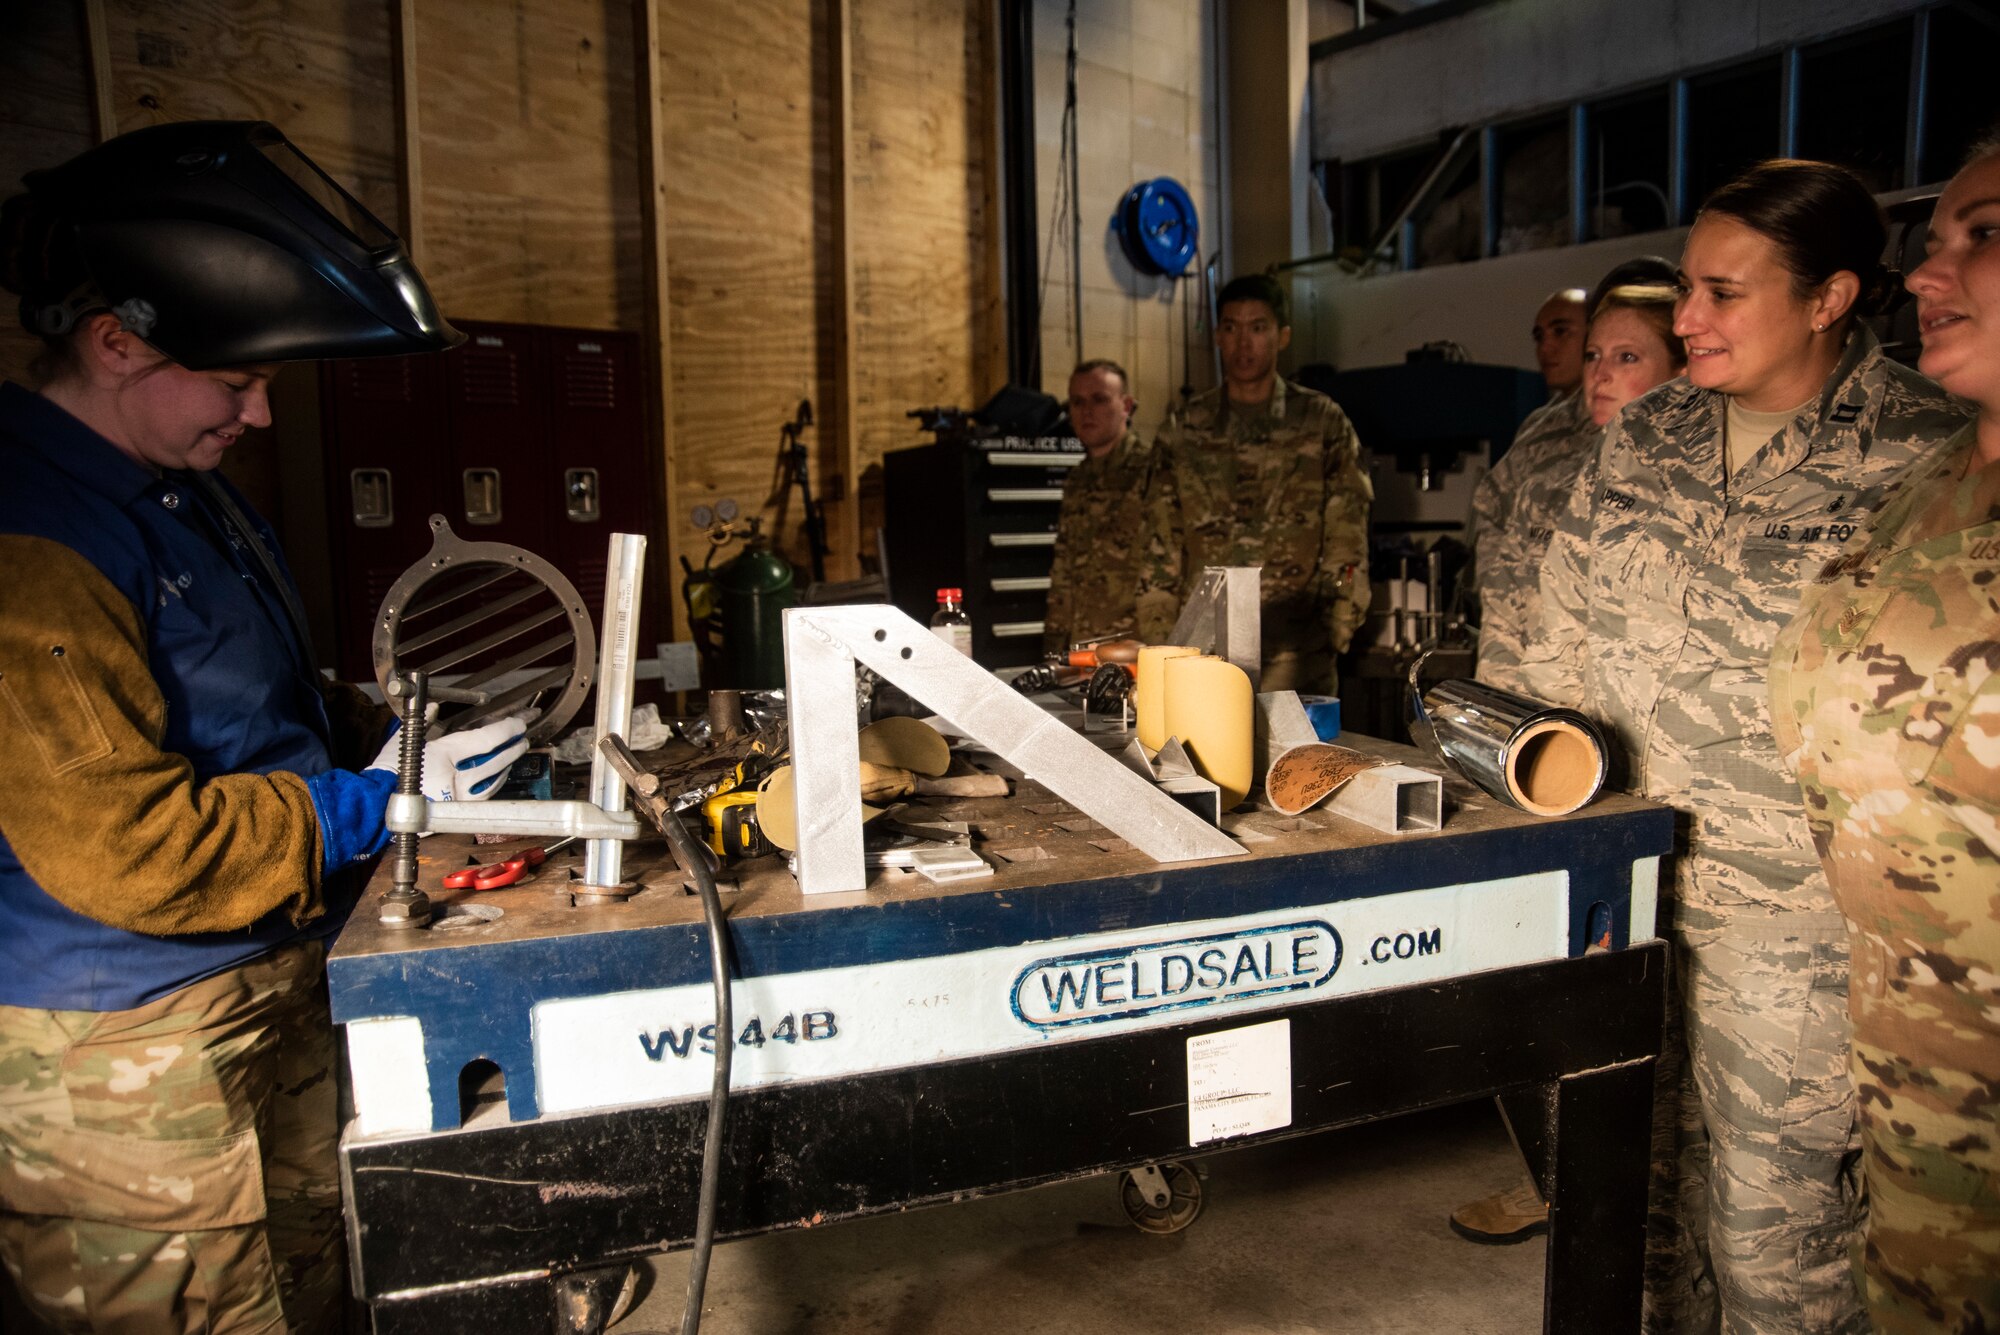 The 53rd Test Support Squadron special devices flight participated in an immersion tour for members assigned to the 325th Fighter Wing on Nov. 8, 2019, at Tyndall Air Force Base, Florida. Airmen visited multiple units of the 53rd Weapons Evaluation Group during the tour, including the metal fabrication shop. The airmen watched as a part was welded by TDY personnel for an aircraft participating in the Weapons System Evaluation Program and Checkered Flag 20-1 exercise on Tyndall's flight line demonstrating the unit's joint partnership with Tyndall, ensuring Airmen are trained and equipment is tested, to support the warfighter. (U.S. Air Force photo by Staff Sgt. Magen M. Reeves)